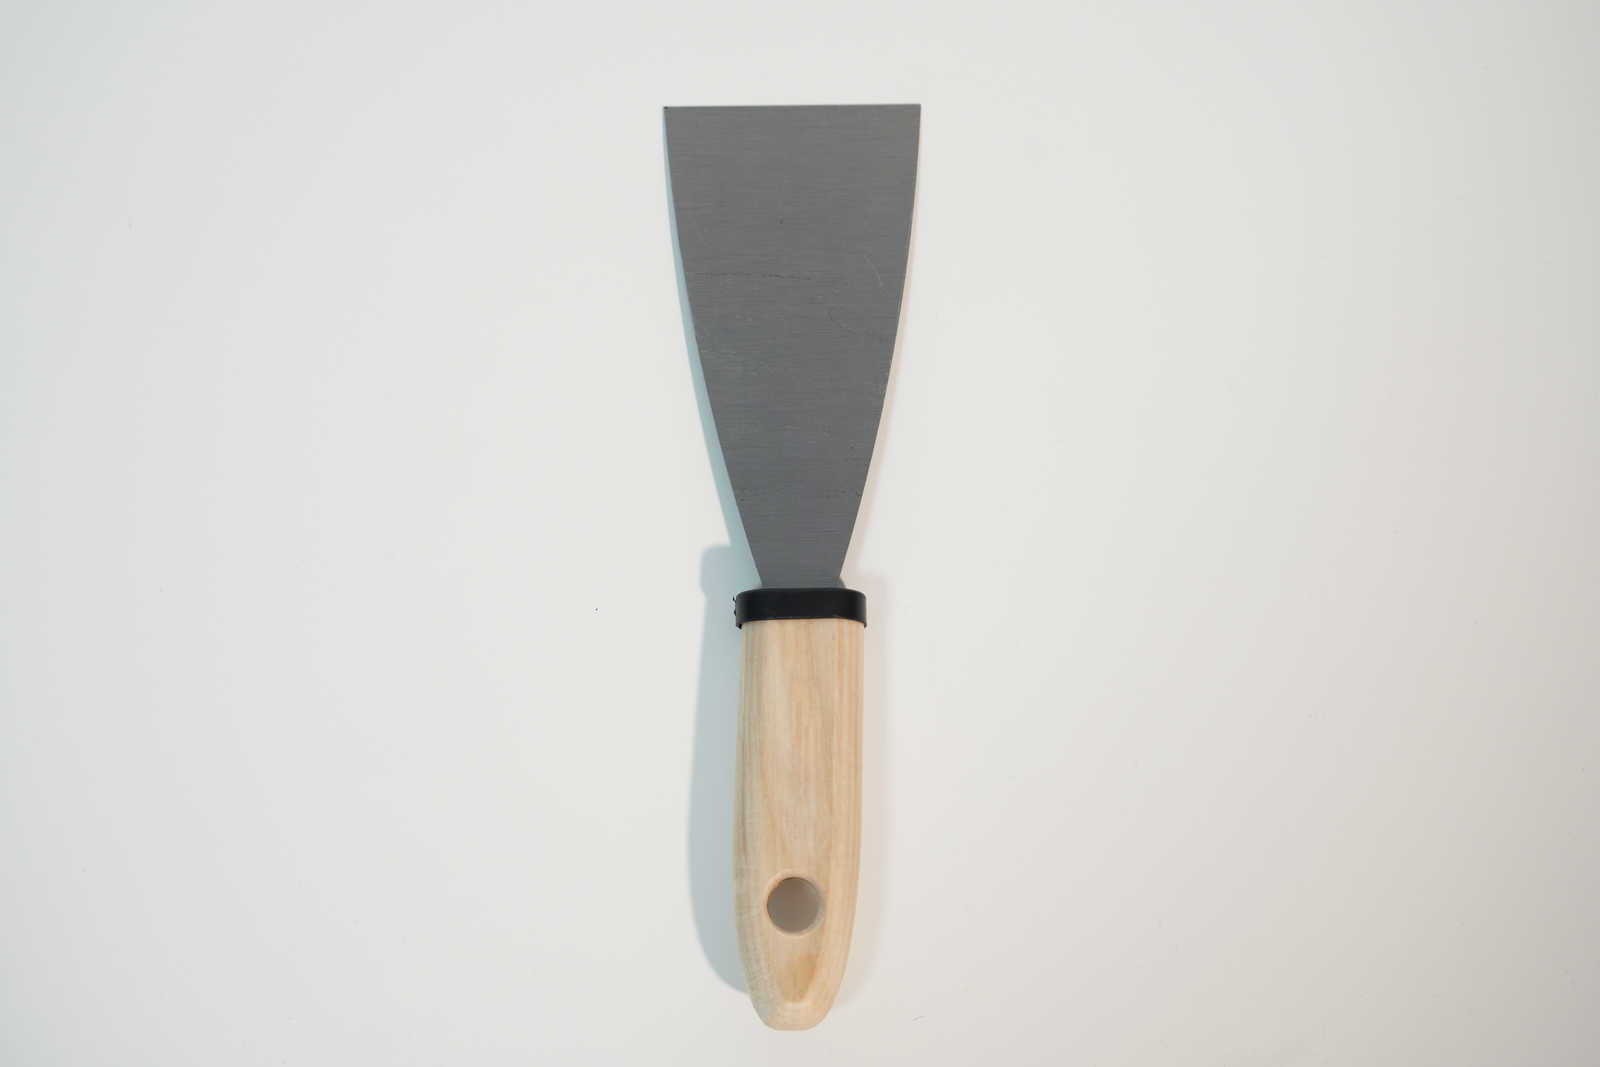             Painter spatula 60mm with flexible steel blade & wooden handle
        